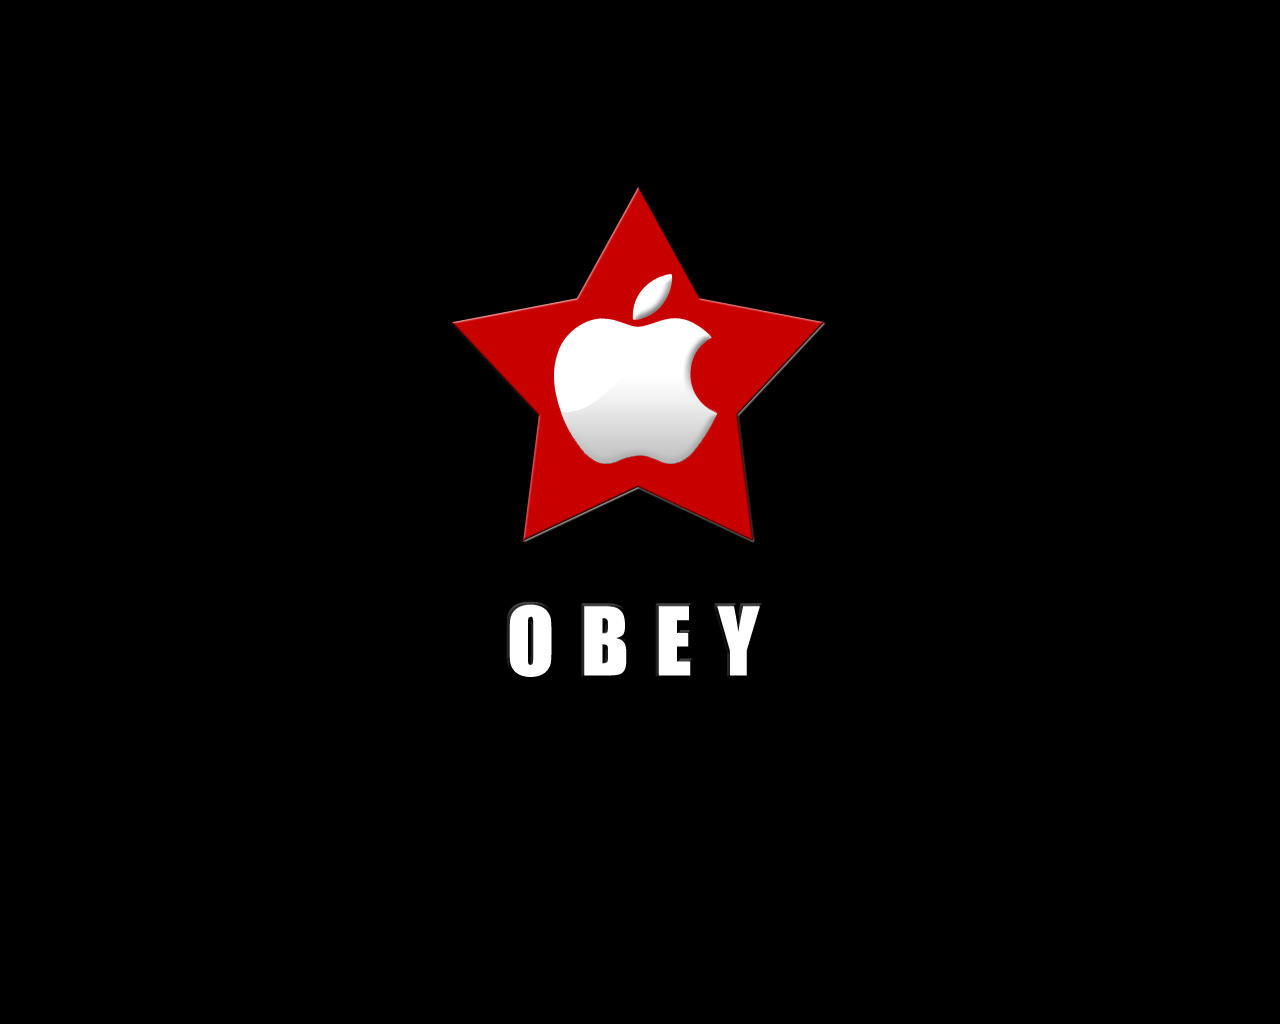 Obey Apple Black By Tch On Deviantart HD Wallpapers Download Free Images Wallpaper [wallpaper981.blogspot.com]